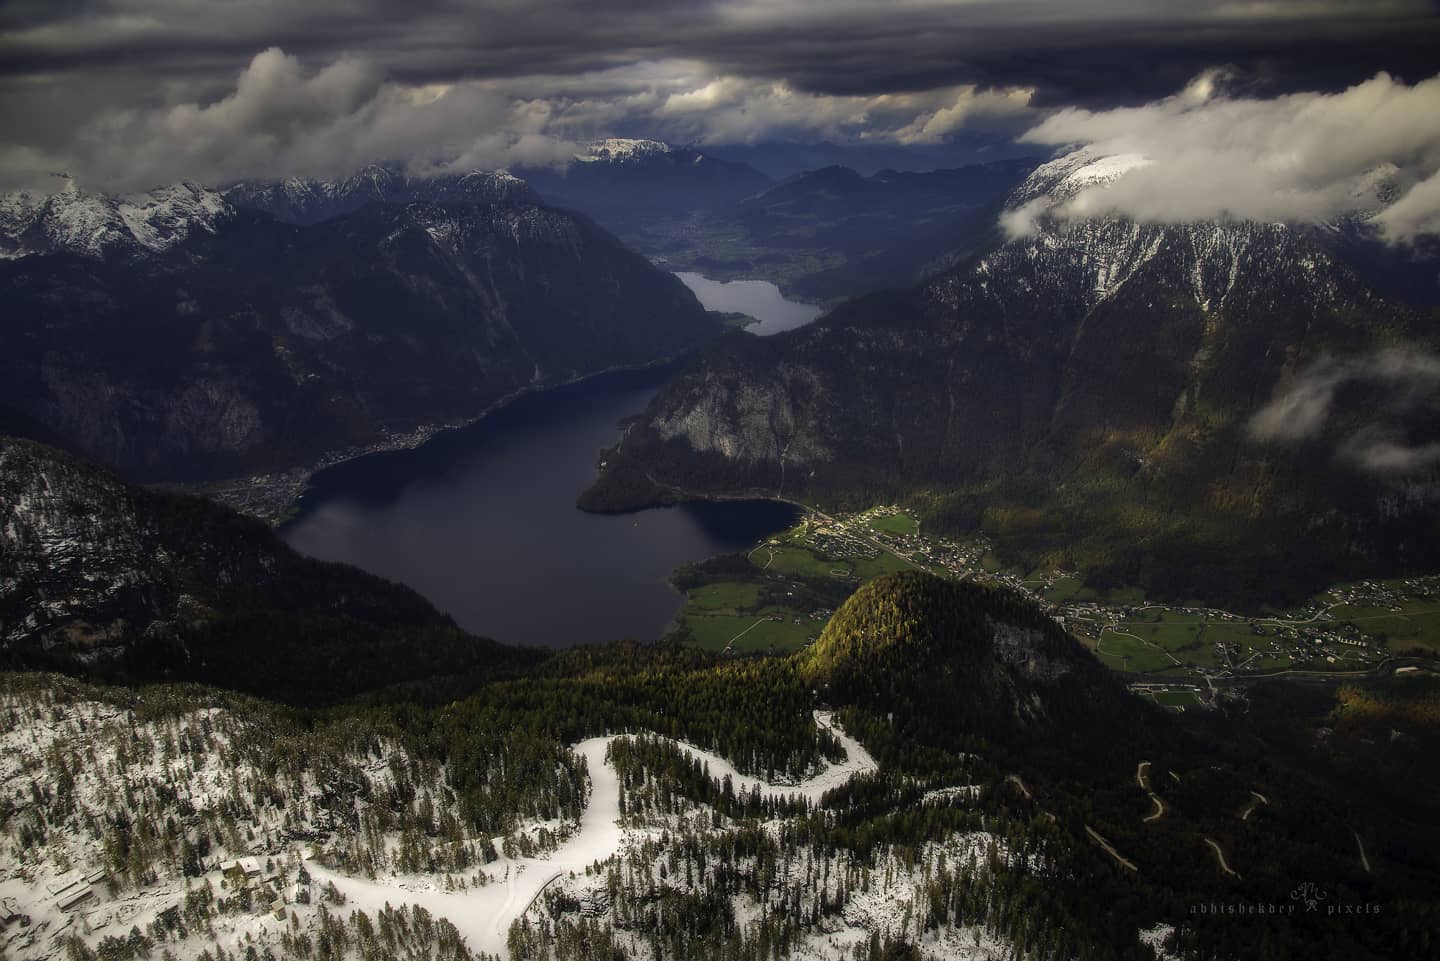 Overlooking the Halstattsee

© Abhishekdey pixels
 
AUSTRIA  2020

Bird eye-view is always special. These Austrian landscapes from the top is easily accessible with cable cars and when you reach there you feel like standing at the verge of heaven. 

The Hallstatt village is commonly the hotspot to relish the beauty of this lake but there are so many other options from where the grandness of the lake can be well appreciated. 

Nikon D610 24.0-85.0 mm f/3.5-4.5
f/14 100 1/30

#abhishekdeypixels 
#nikonindiaofficial 
#nikondach 
#tlpicks 
#lonelyplanet
#visitaustria 
#NGTIndia 
#OTHallofFrame 
#OutlookTraveller 
#YourShotPhotographer 
#photowalkglobal 
#ourfotoworld 
#earthoutdoors 
#earthofficial 
#passionpassport 
#triplegend 
#naturegeography 
#ourplanetdaily 
#planetearth 
#austria 
#tyrol 
#mountainlove 
#planet_earth_shots 
#earthpix 
#earthfocus 
#BBCTravel 
#krippenstein
#wanderlust
#austriatourism
#dachsteinkrippenstein